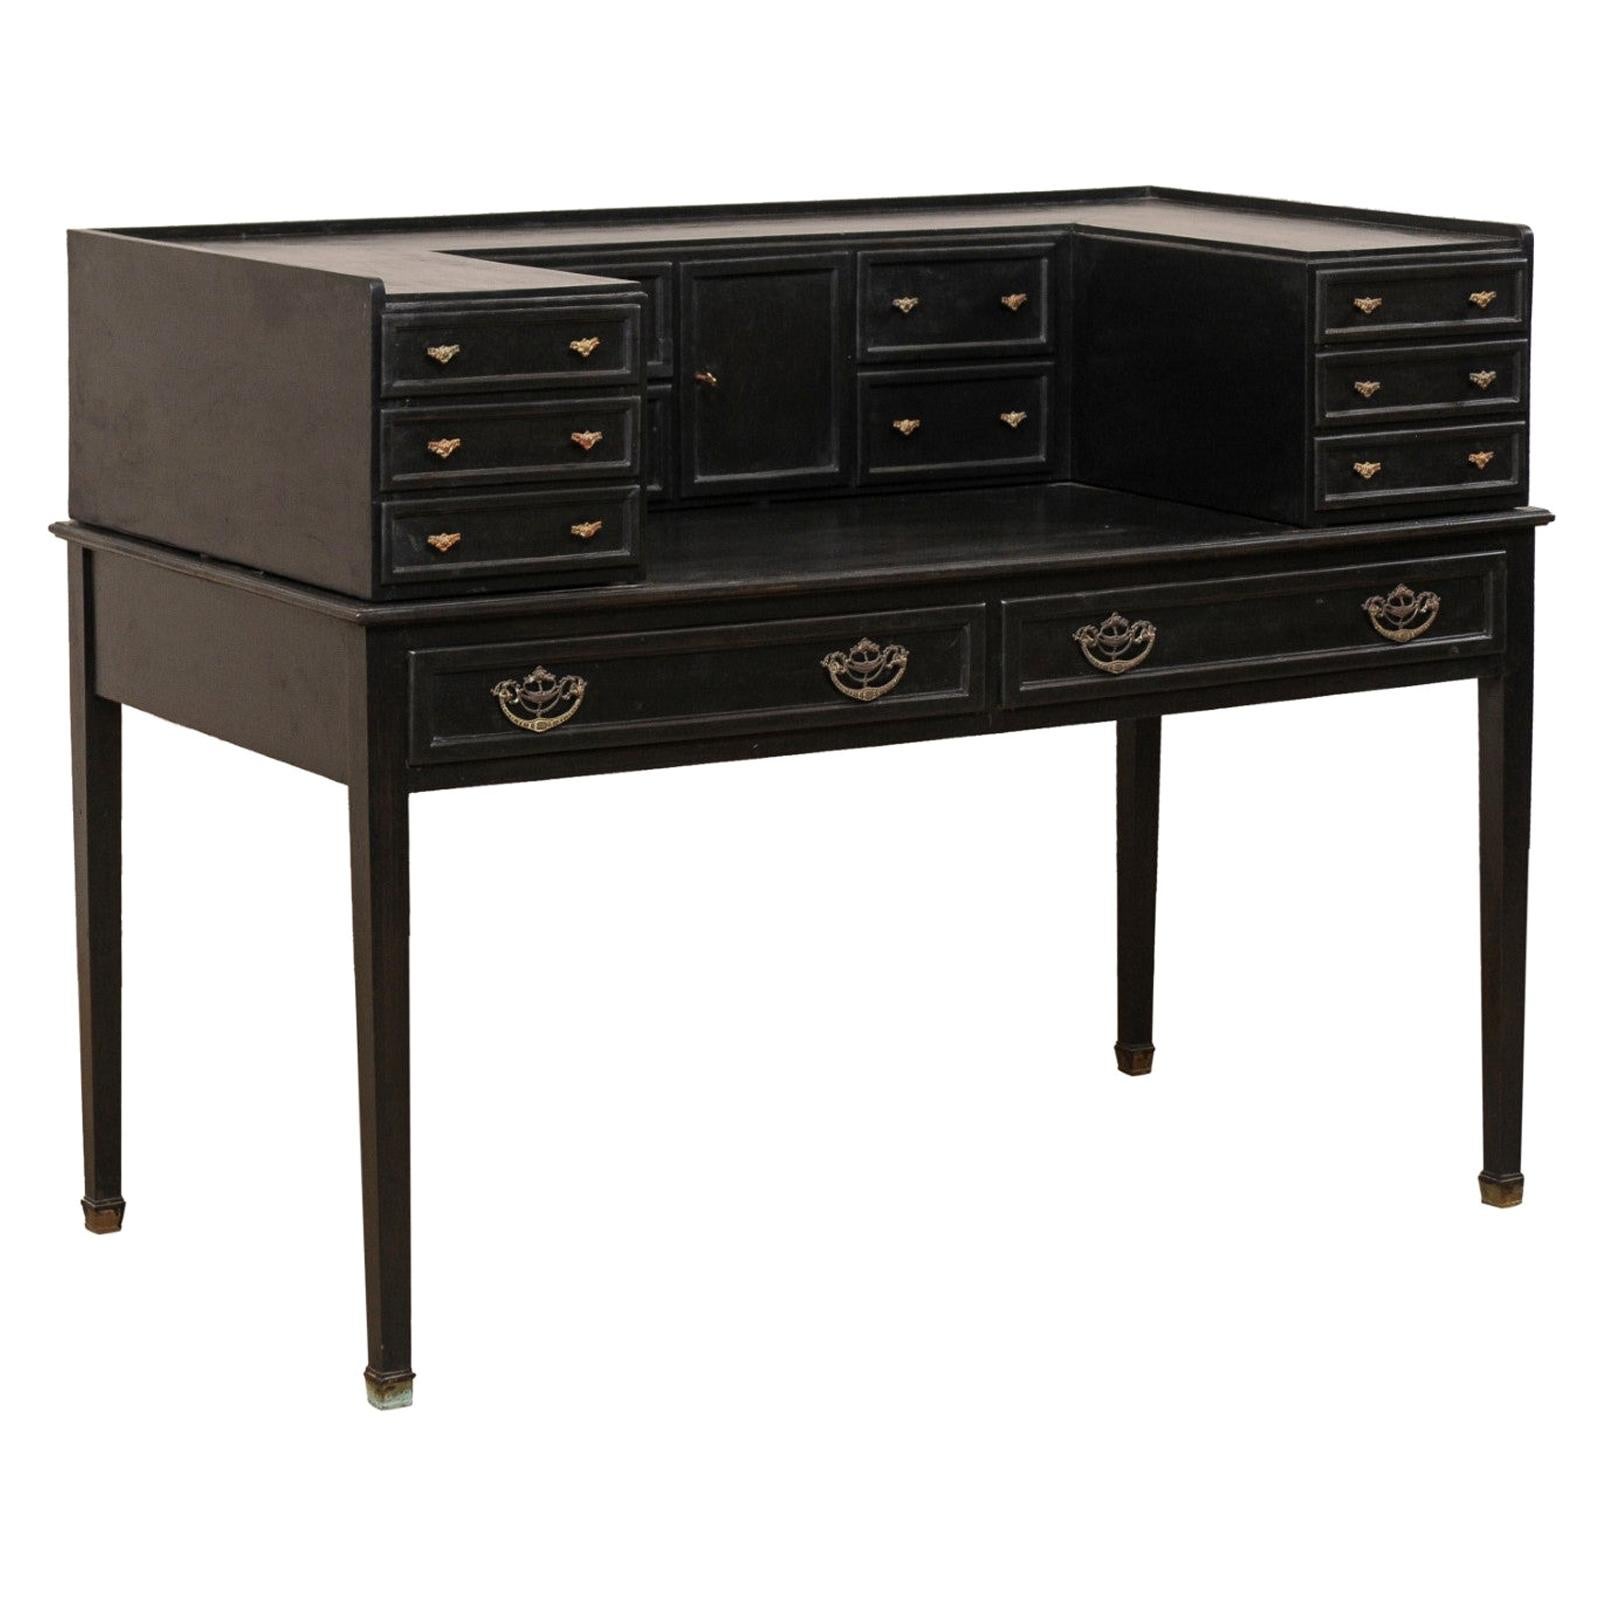 English Carlton House Desk in Black Finish with Great Storage Early 20th Century